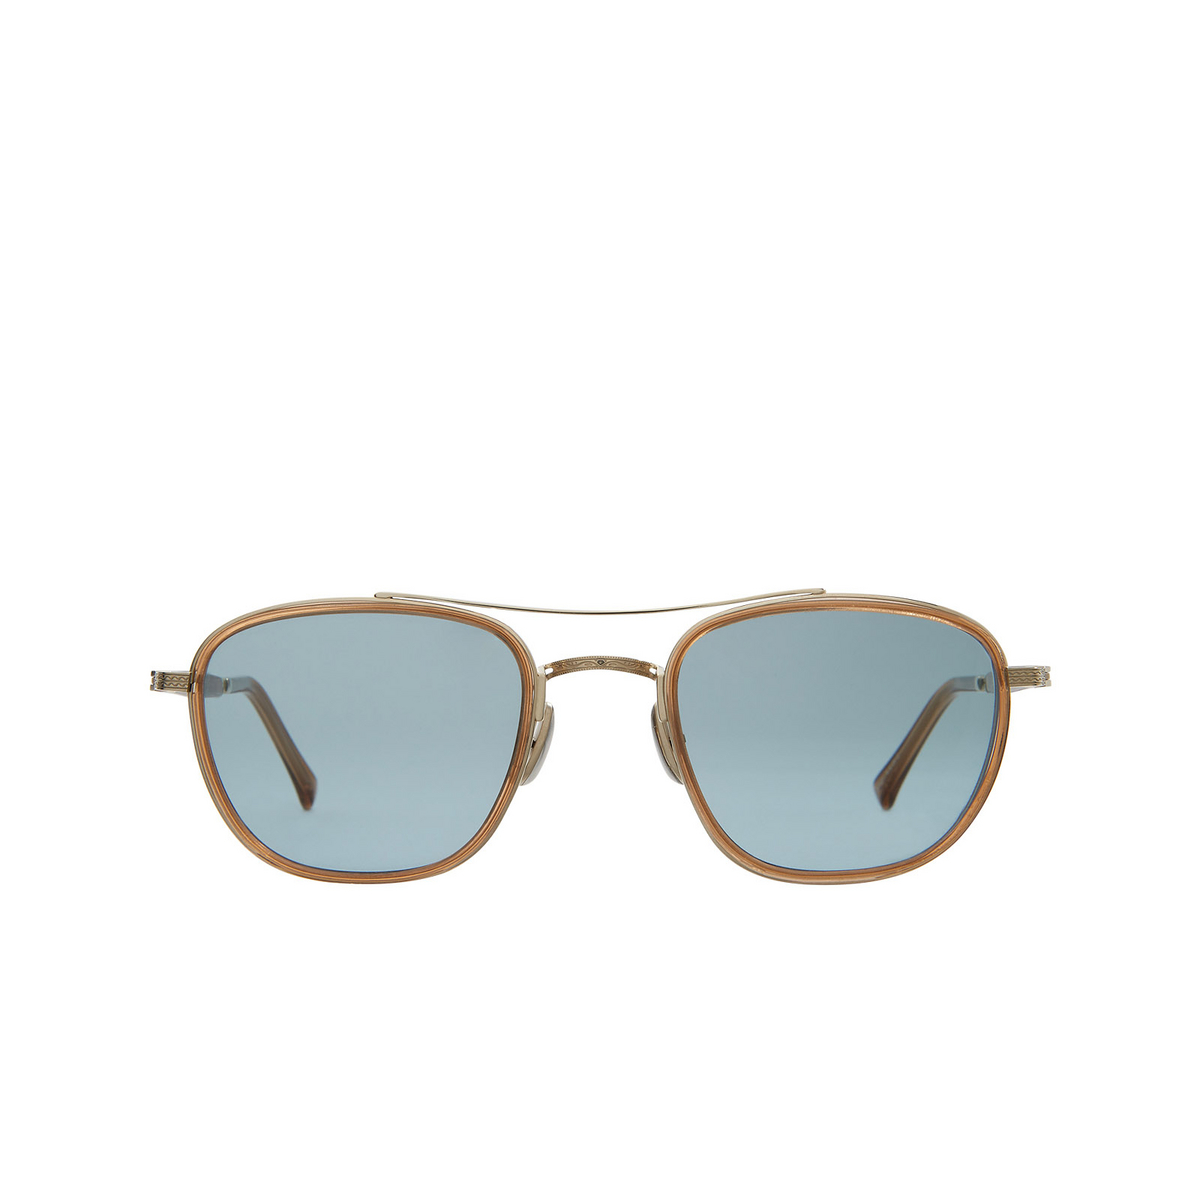 Mr. Leight PRICE S Sunglasses TOP-12KG/PBLU Vintage Burnt Tortoise - front view